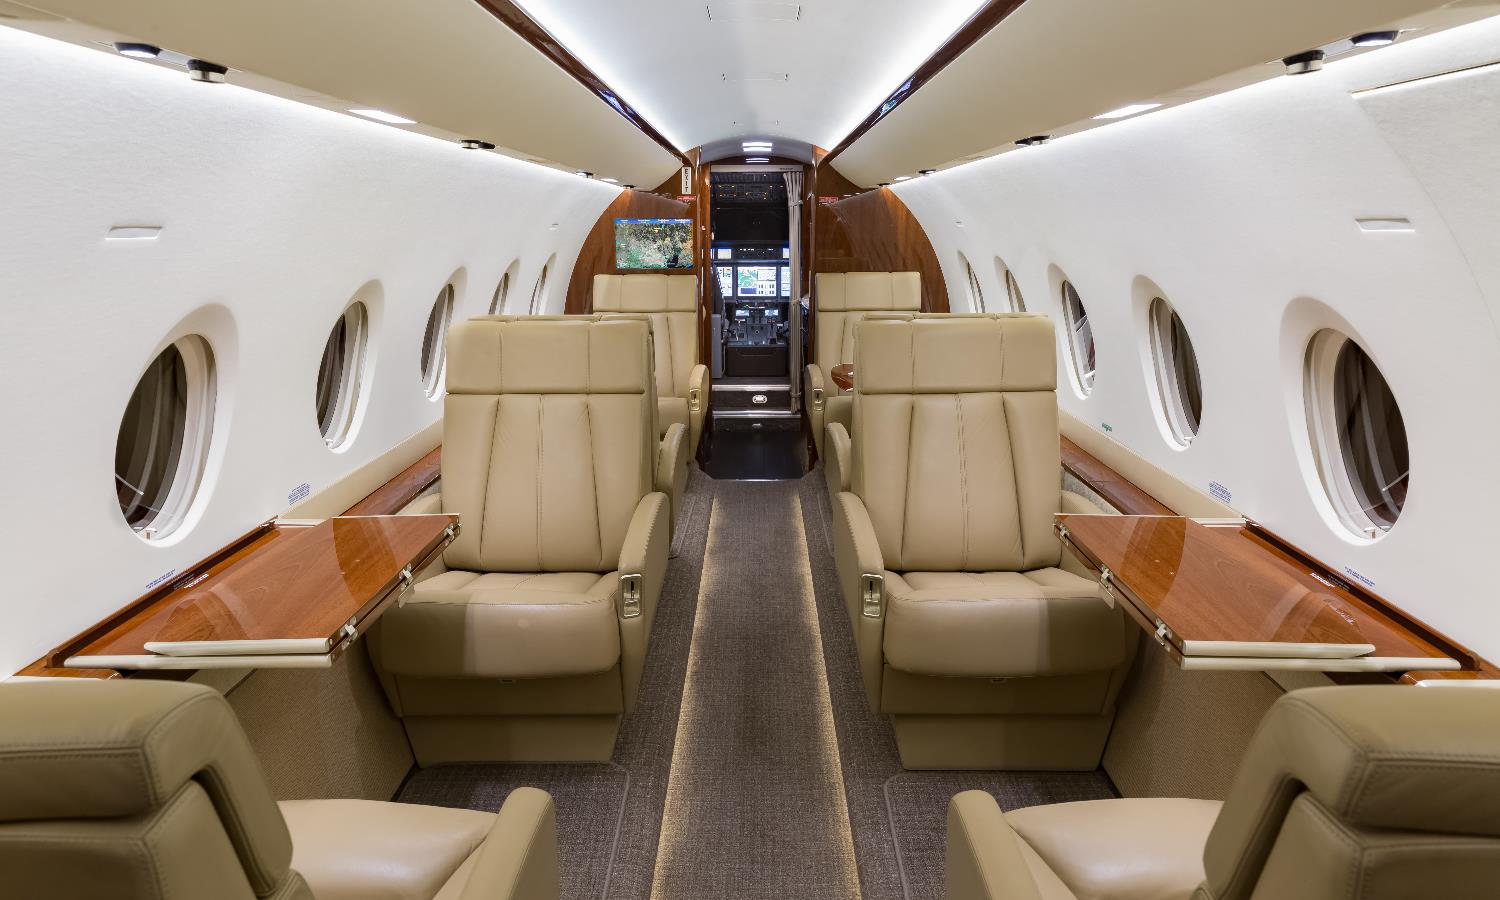 Gulfstream G280  S/N 2094 for sale | gallery image: /userfiles/files/aft%20fwd(1).jpg